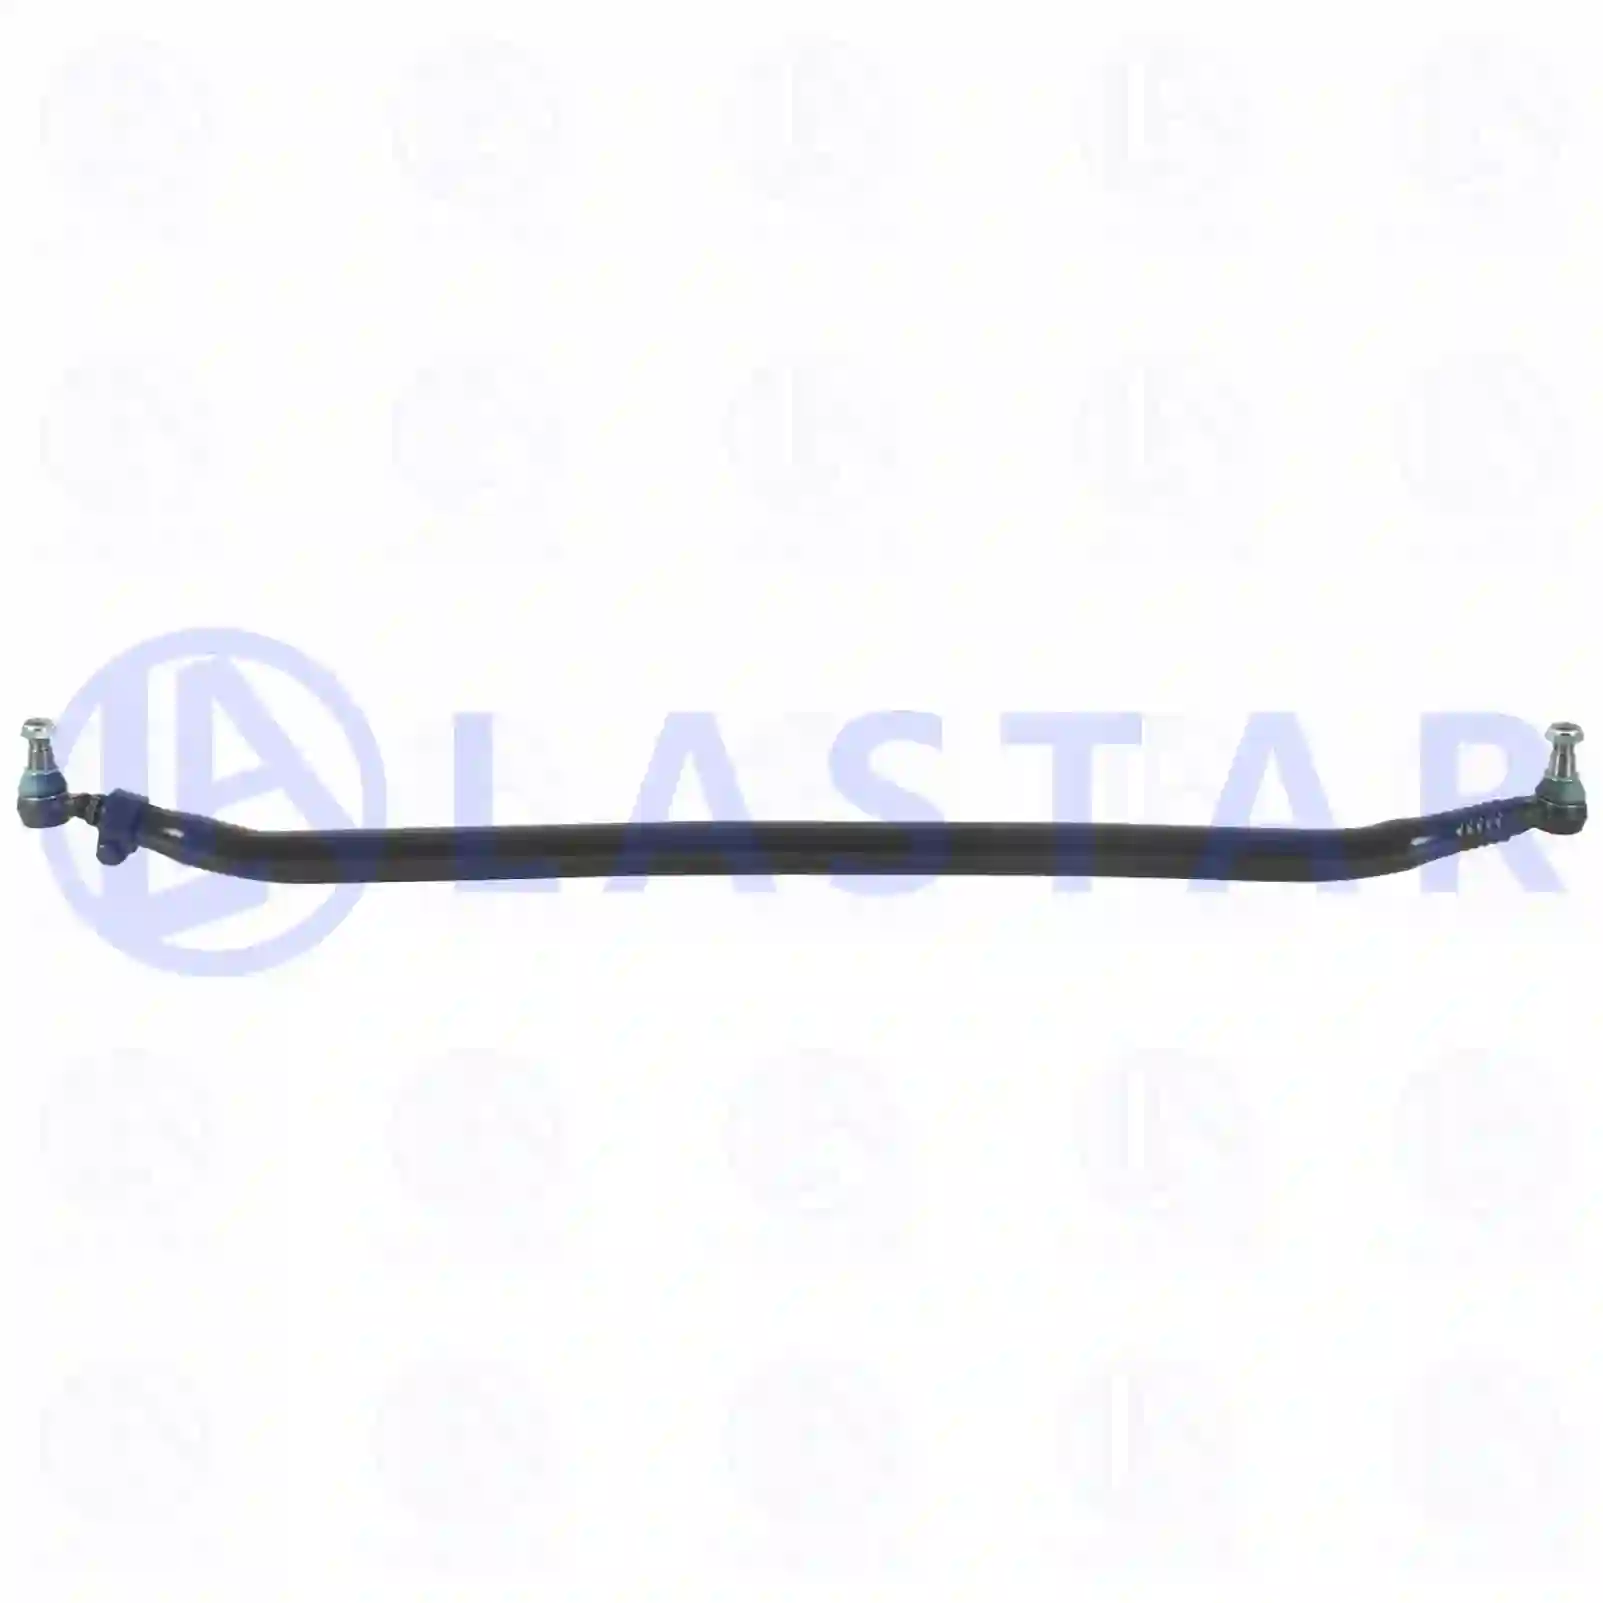 Track rod, 77730503, 7421192770, 7422159755, 21192770, 22159755 ||  77730503 Lastar Spare Part | Truck Spare Parts, Auotomotive Spare Parts Track rod, 77730503, 7421192770, 7422159755, 21192770, 22159755 ||  77730503 Lastar Spare Part | Truck Spare Parts, Auotomotive Spare Parts